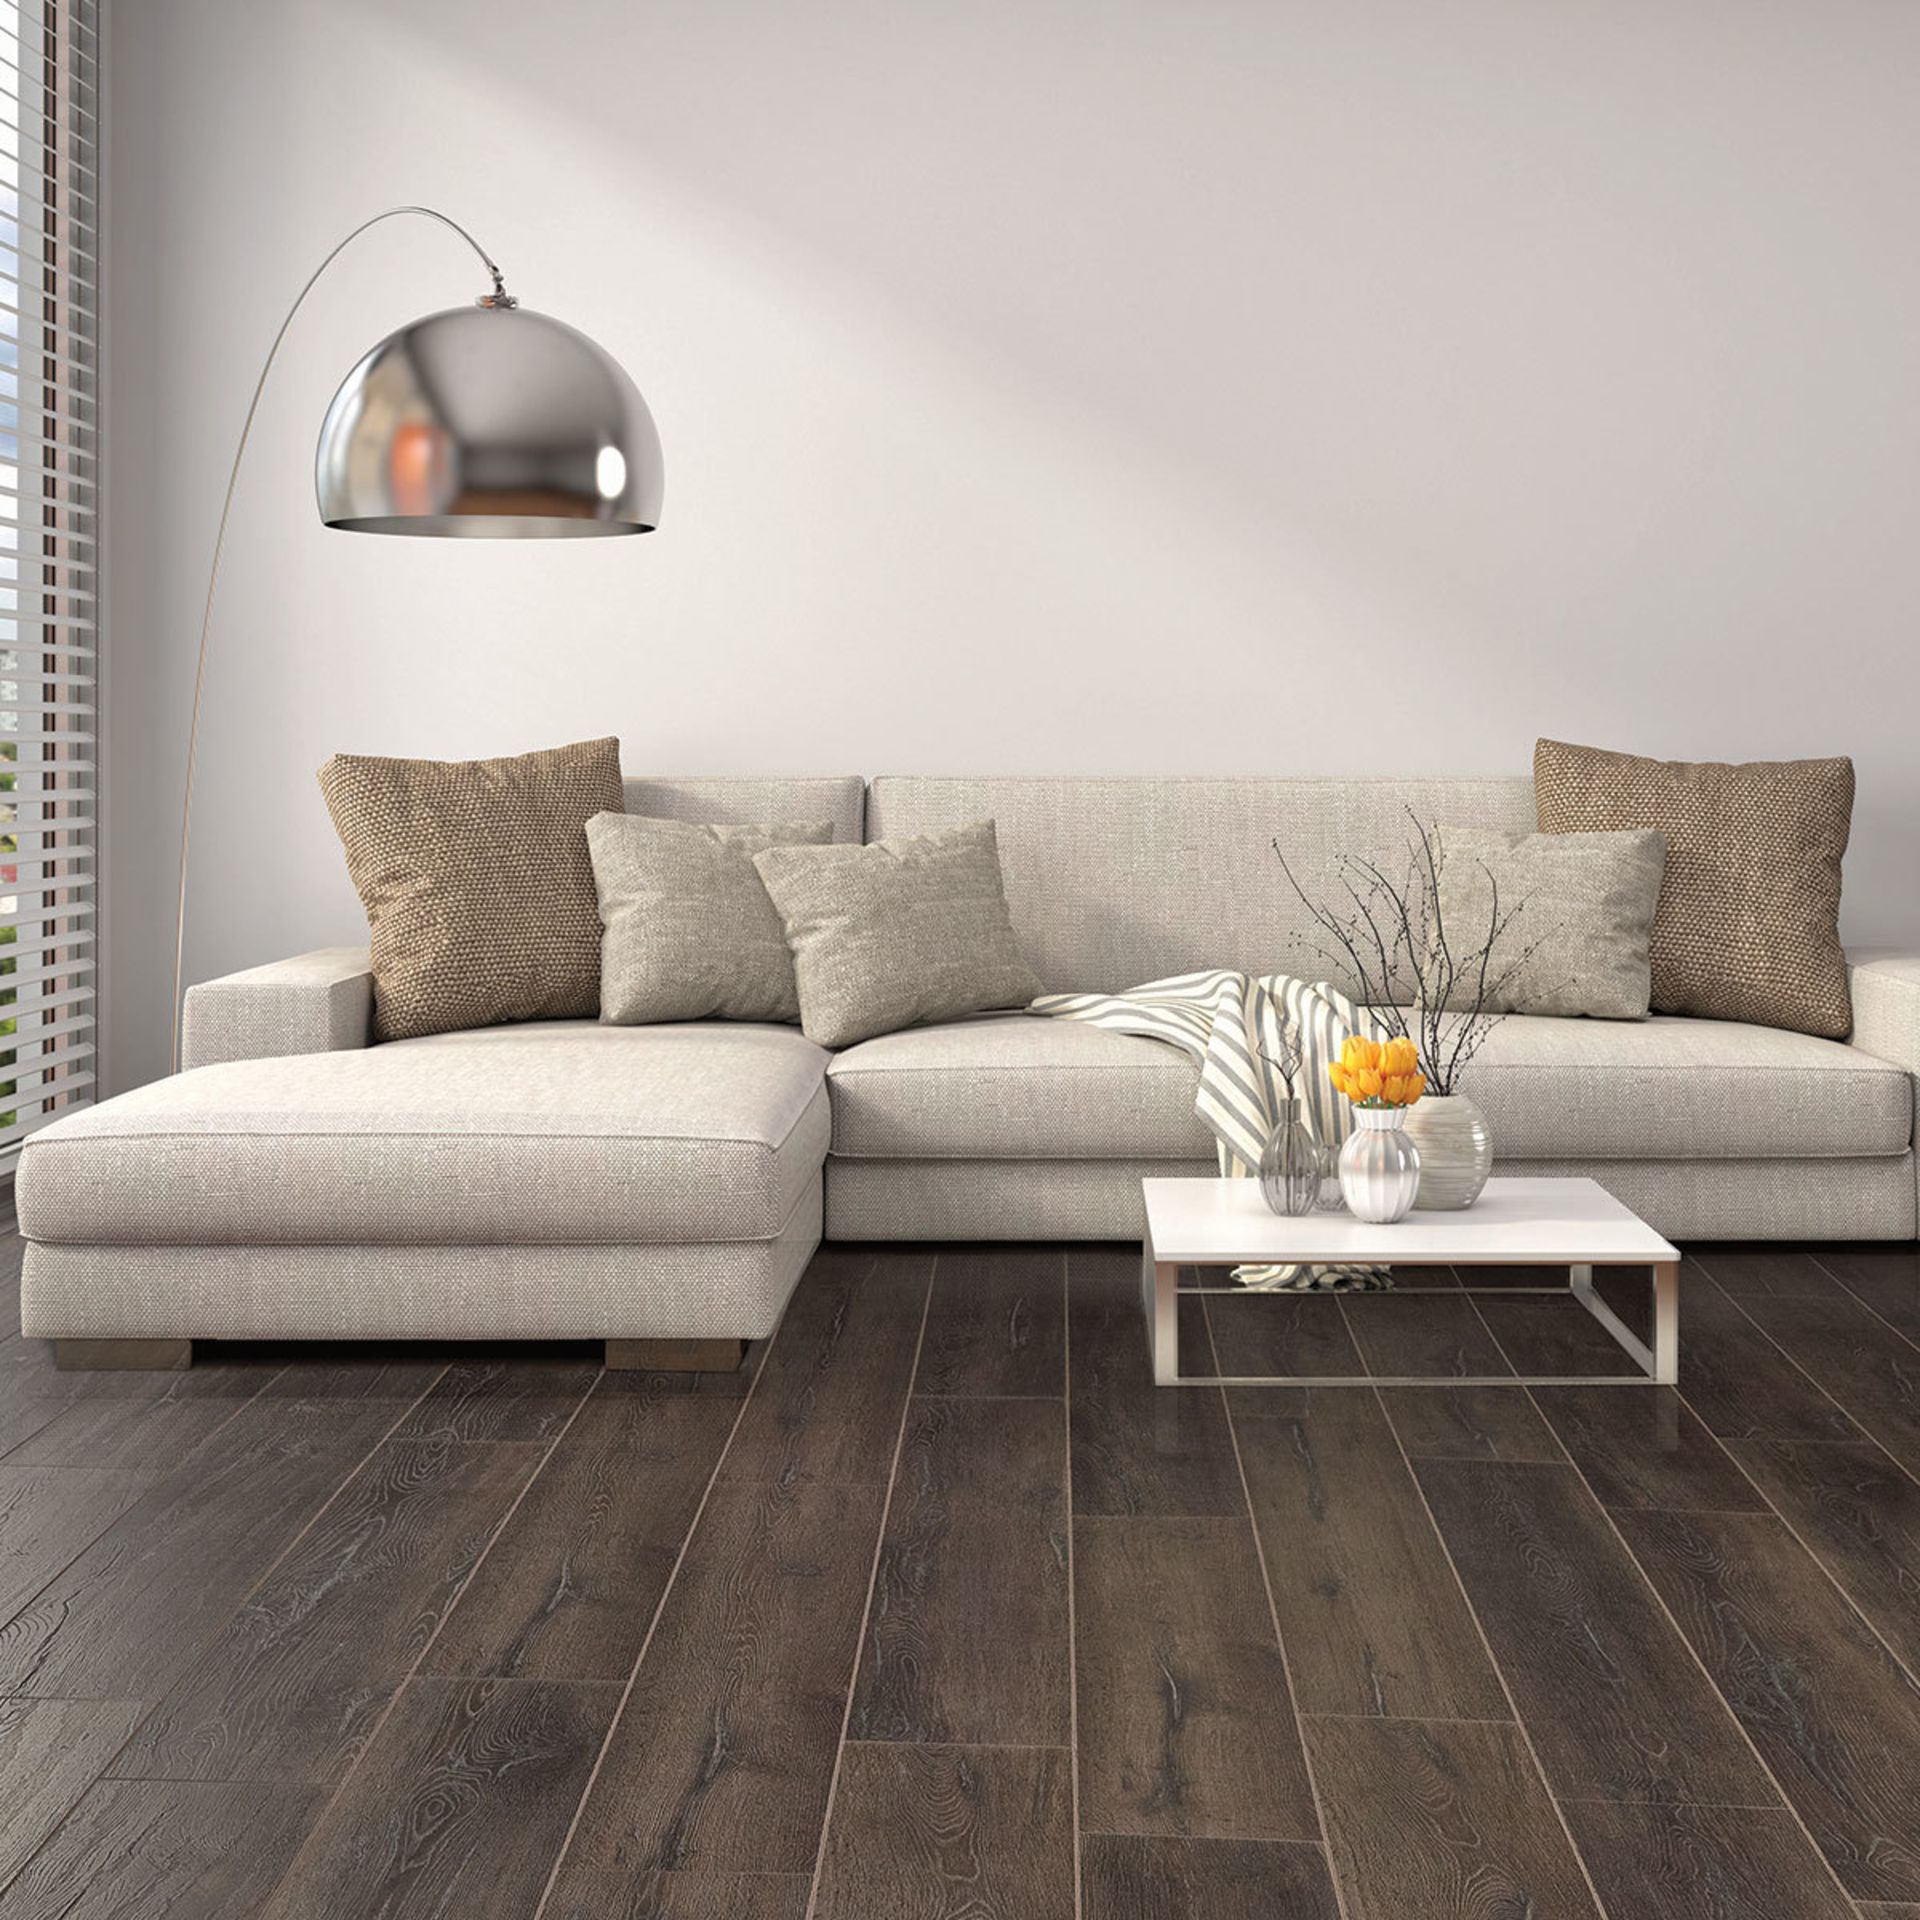 1 BOXED GOLDEN SELECT LAMINATE FLOORING IN DOMINGO BROWN OAK (COVERS APPROXIMATELY 1.162m2 PER